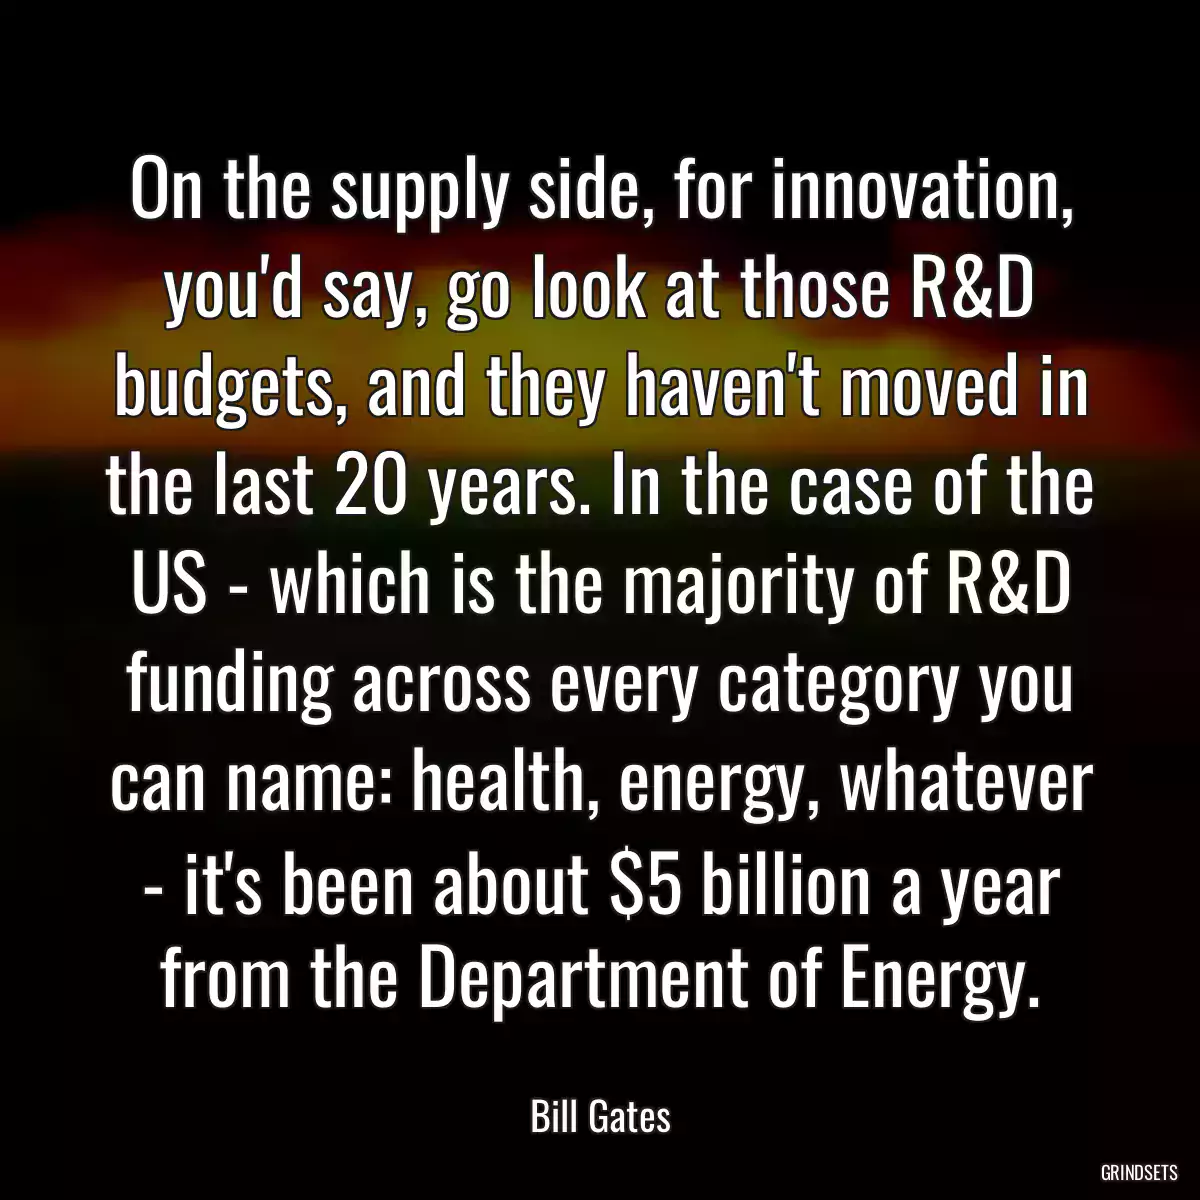 On the supply side, for innovation, you\'d say, go look at those R&D budgets, and they haven\'t moved in the last 20 years. In the case of the US - which is the majority of R&D funding across every category you can name: health, energy, whatever - it\'s been about $5 billion a year from the Department of Energy.